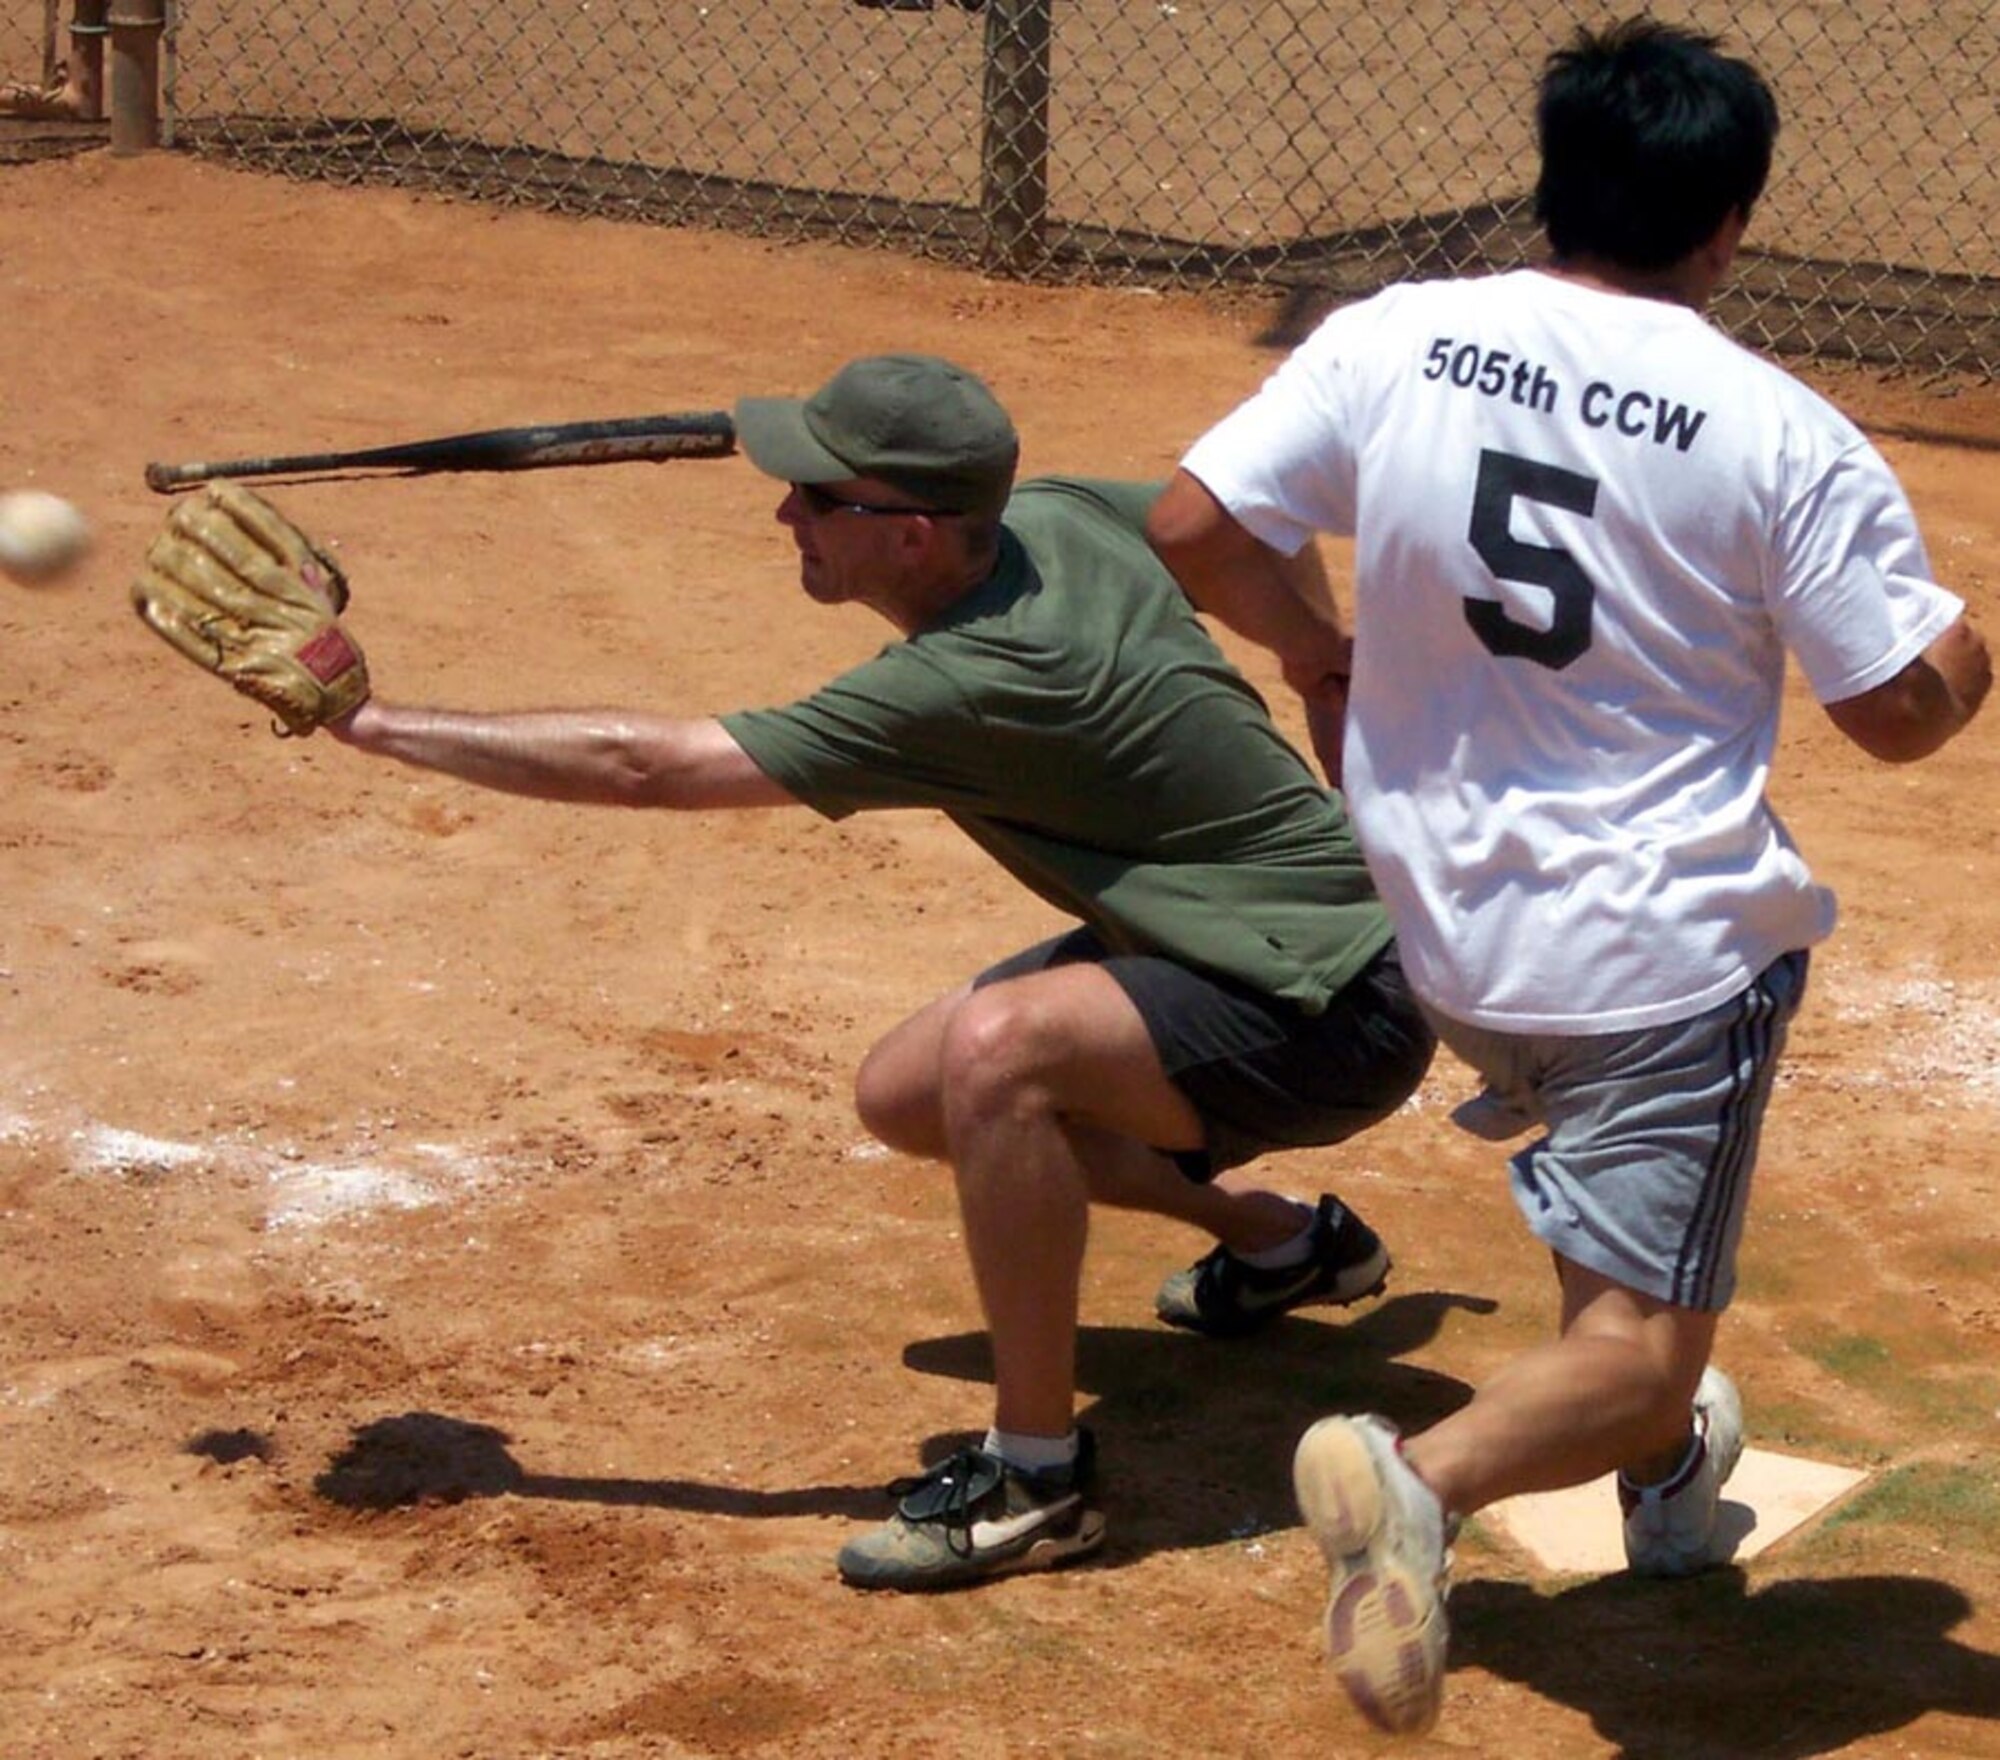 Jim Hoy, 505th Command and Control Wing, beats the throw to home as catcher Keith Schlechte, Air Force Special Operations Command, waits for the ball. This is the third year in a row the 505th CCW team has won the Over 30 softball tournament . (U.S. Air Force photo by Staff Sgt. Haldon Marmolejos)